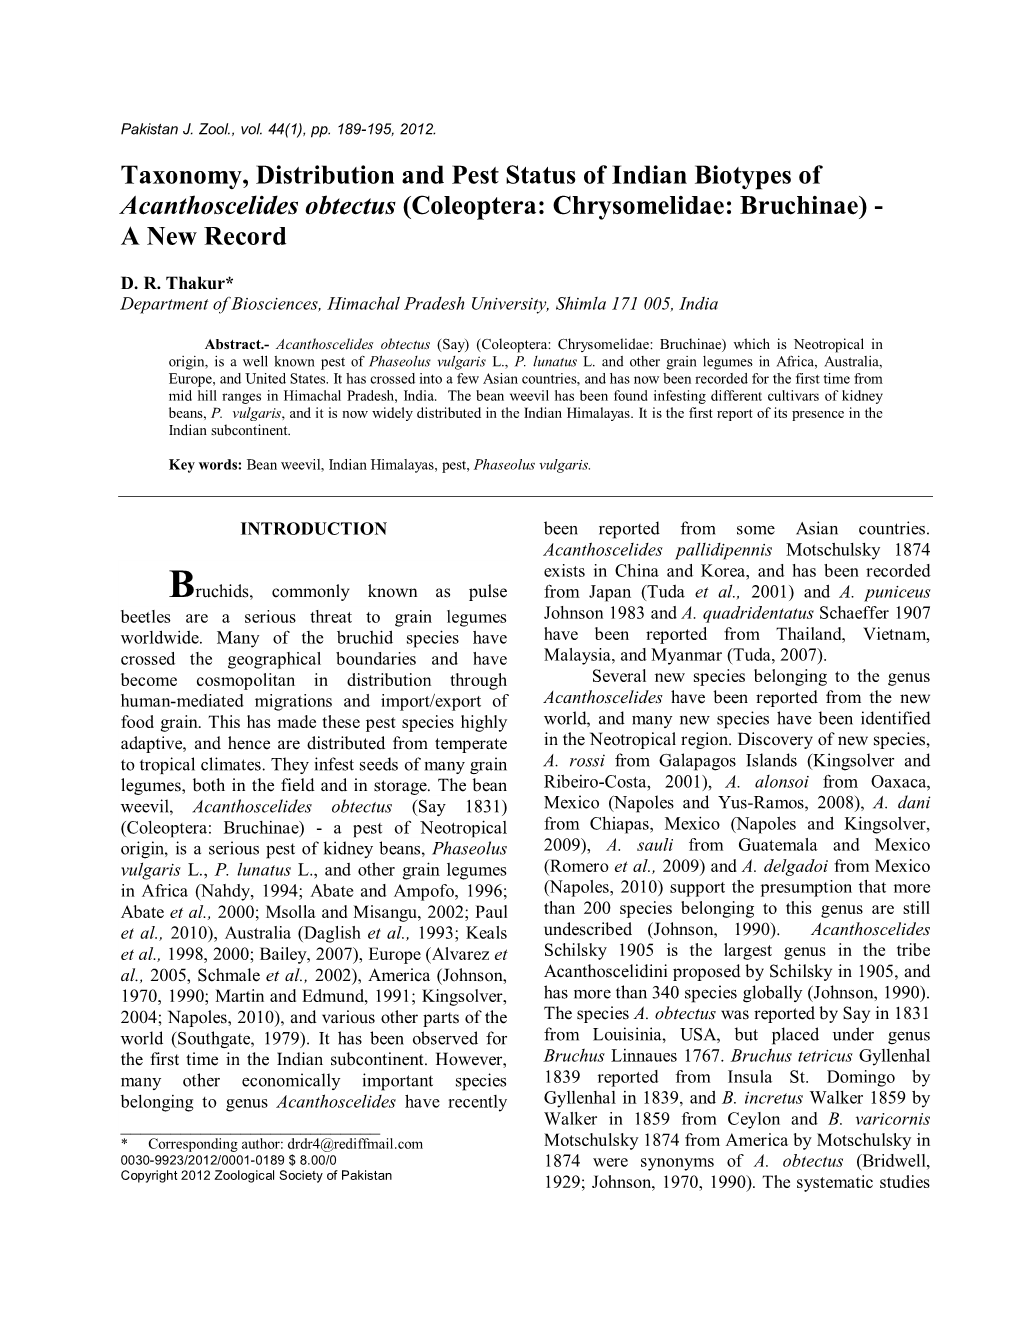 Taxonomy, Distribution and Pest Status of Indian Biotypes of Acanthoscelides Obtectus (Coleoptera: Chrysomelidae: Bruchinae) - a New Record